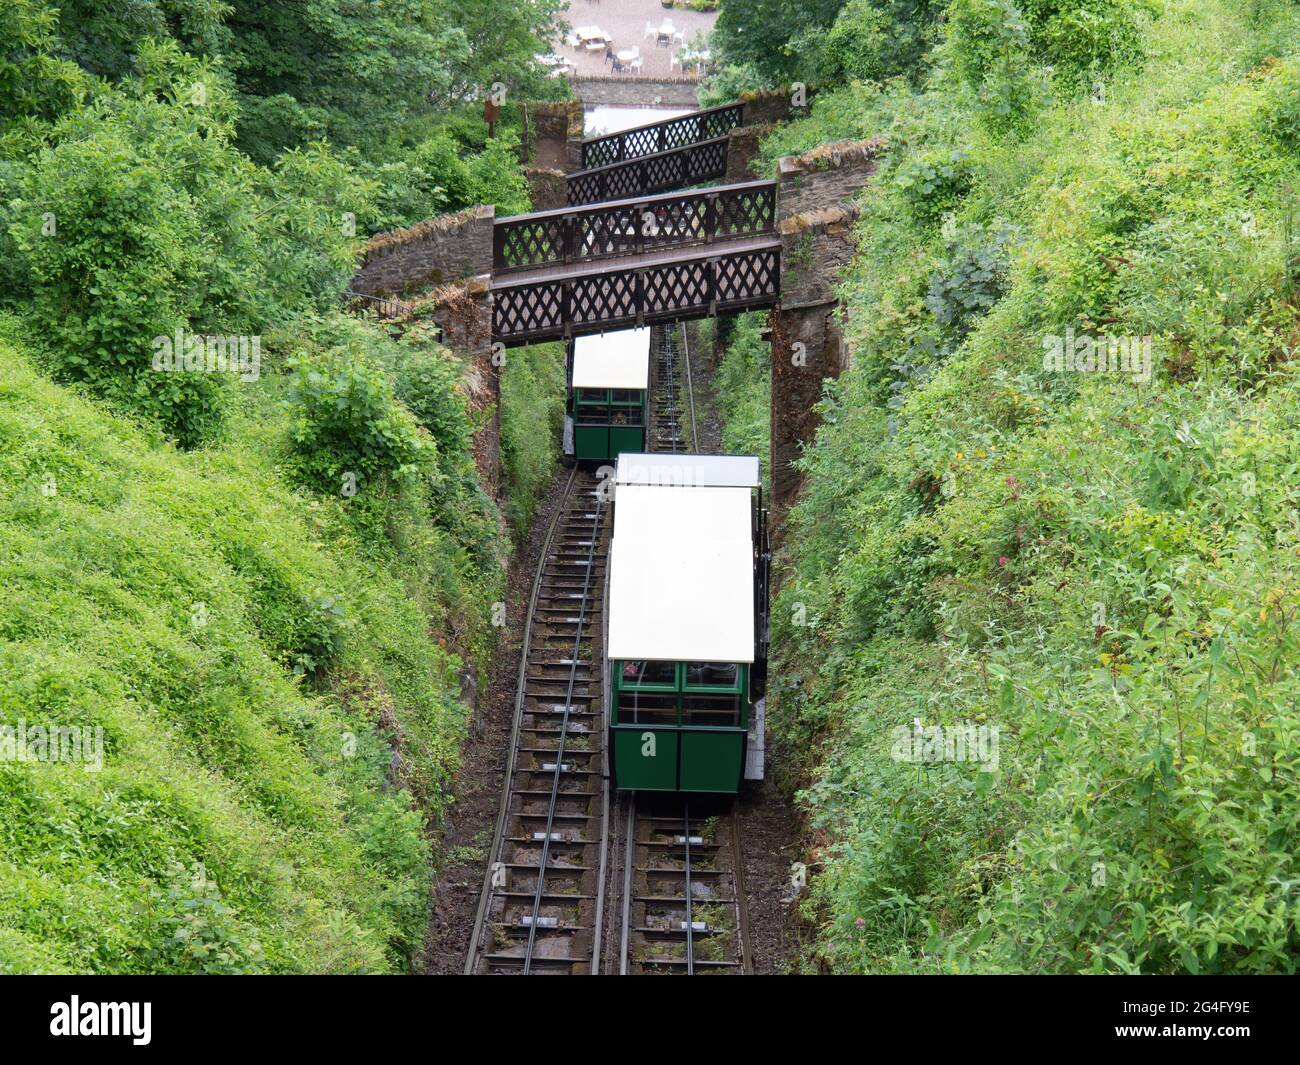 LYNTON, DEVON, ENGLAND - JUNE 20 2021: The water-powered funicular between the villages of Lynton and Lynmouth in action. Cars crossing. Stock Photo